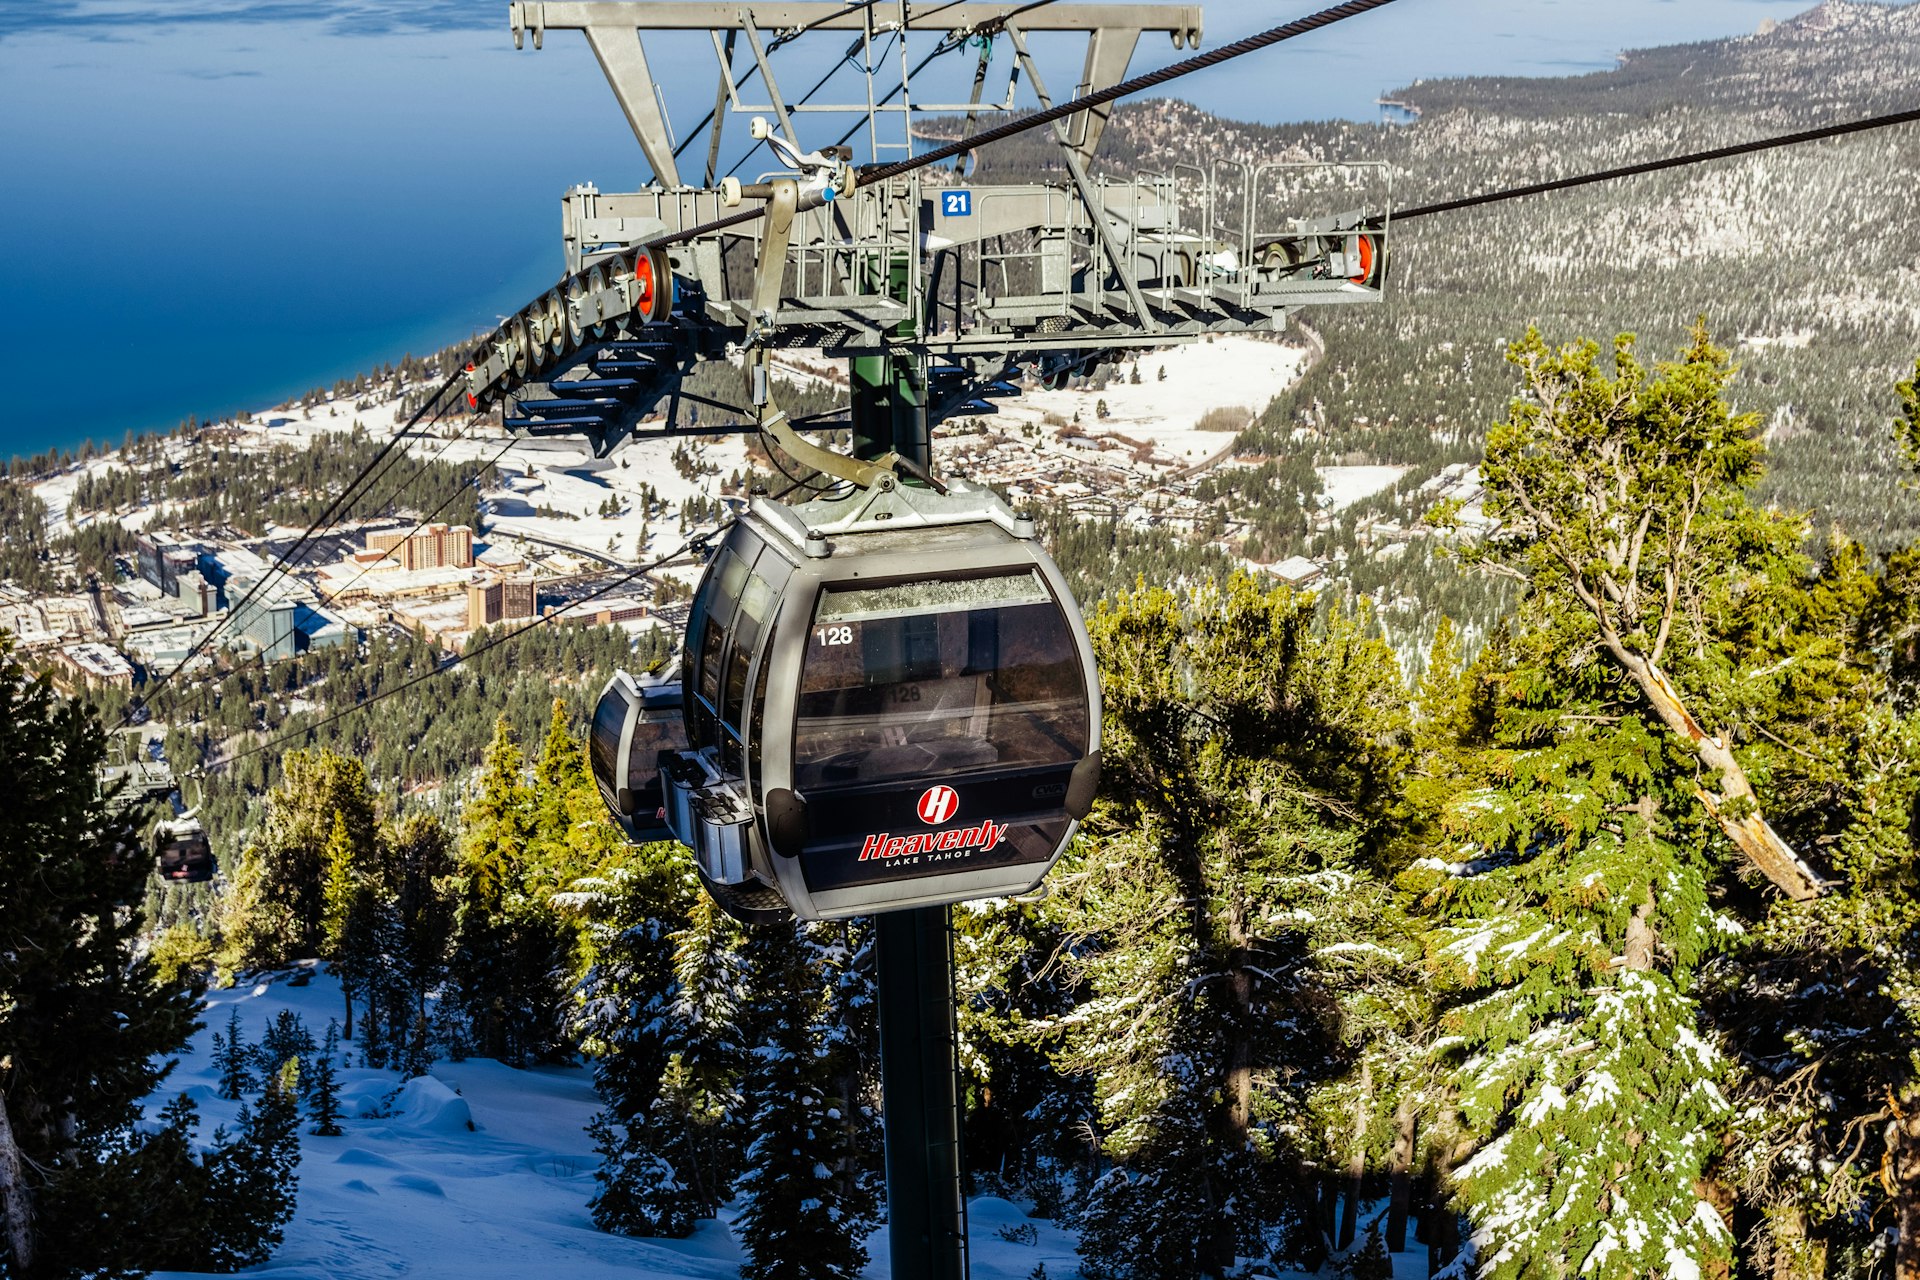 A cable car carriage on its ascent up a mountain. A large lake is in the background